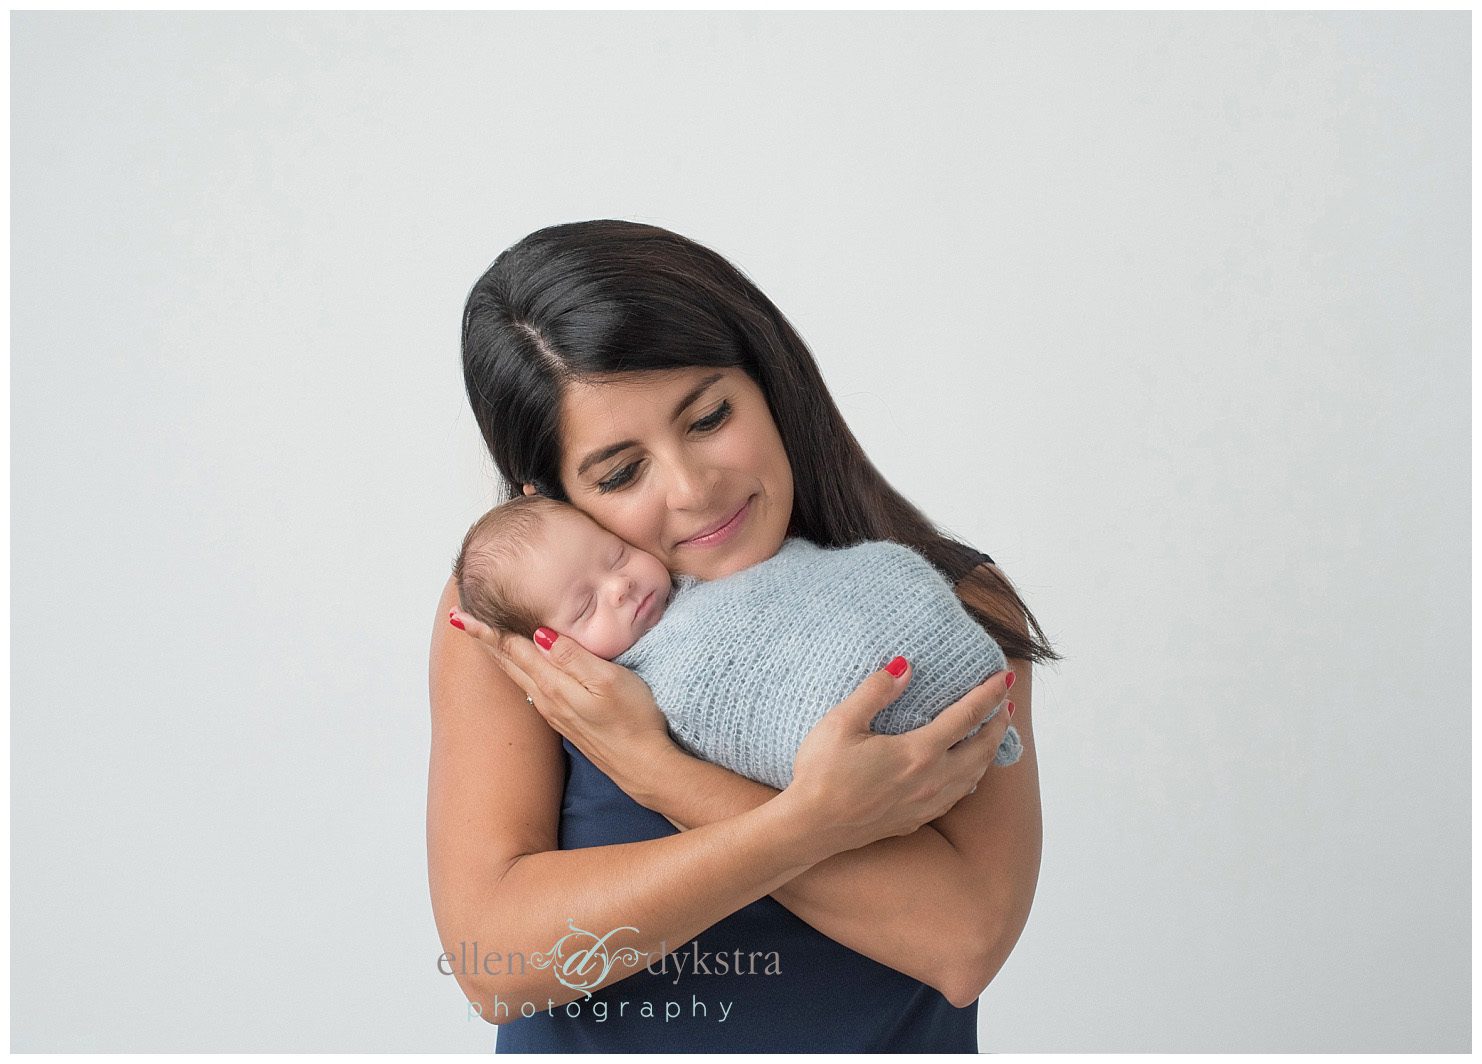 What should parents wear for newborn family photos